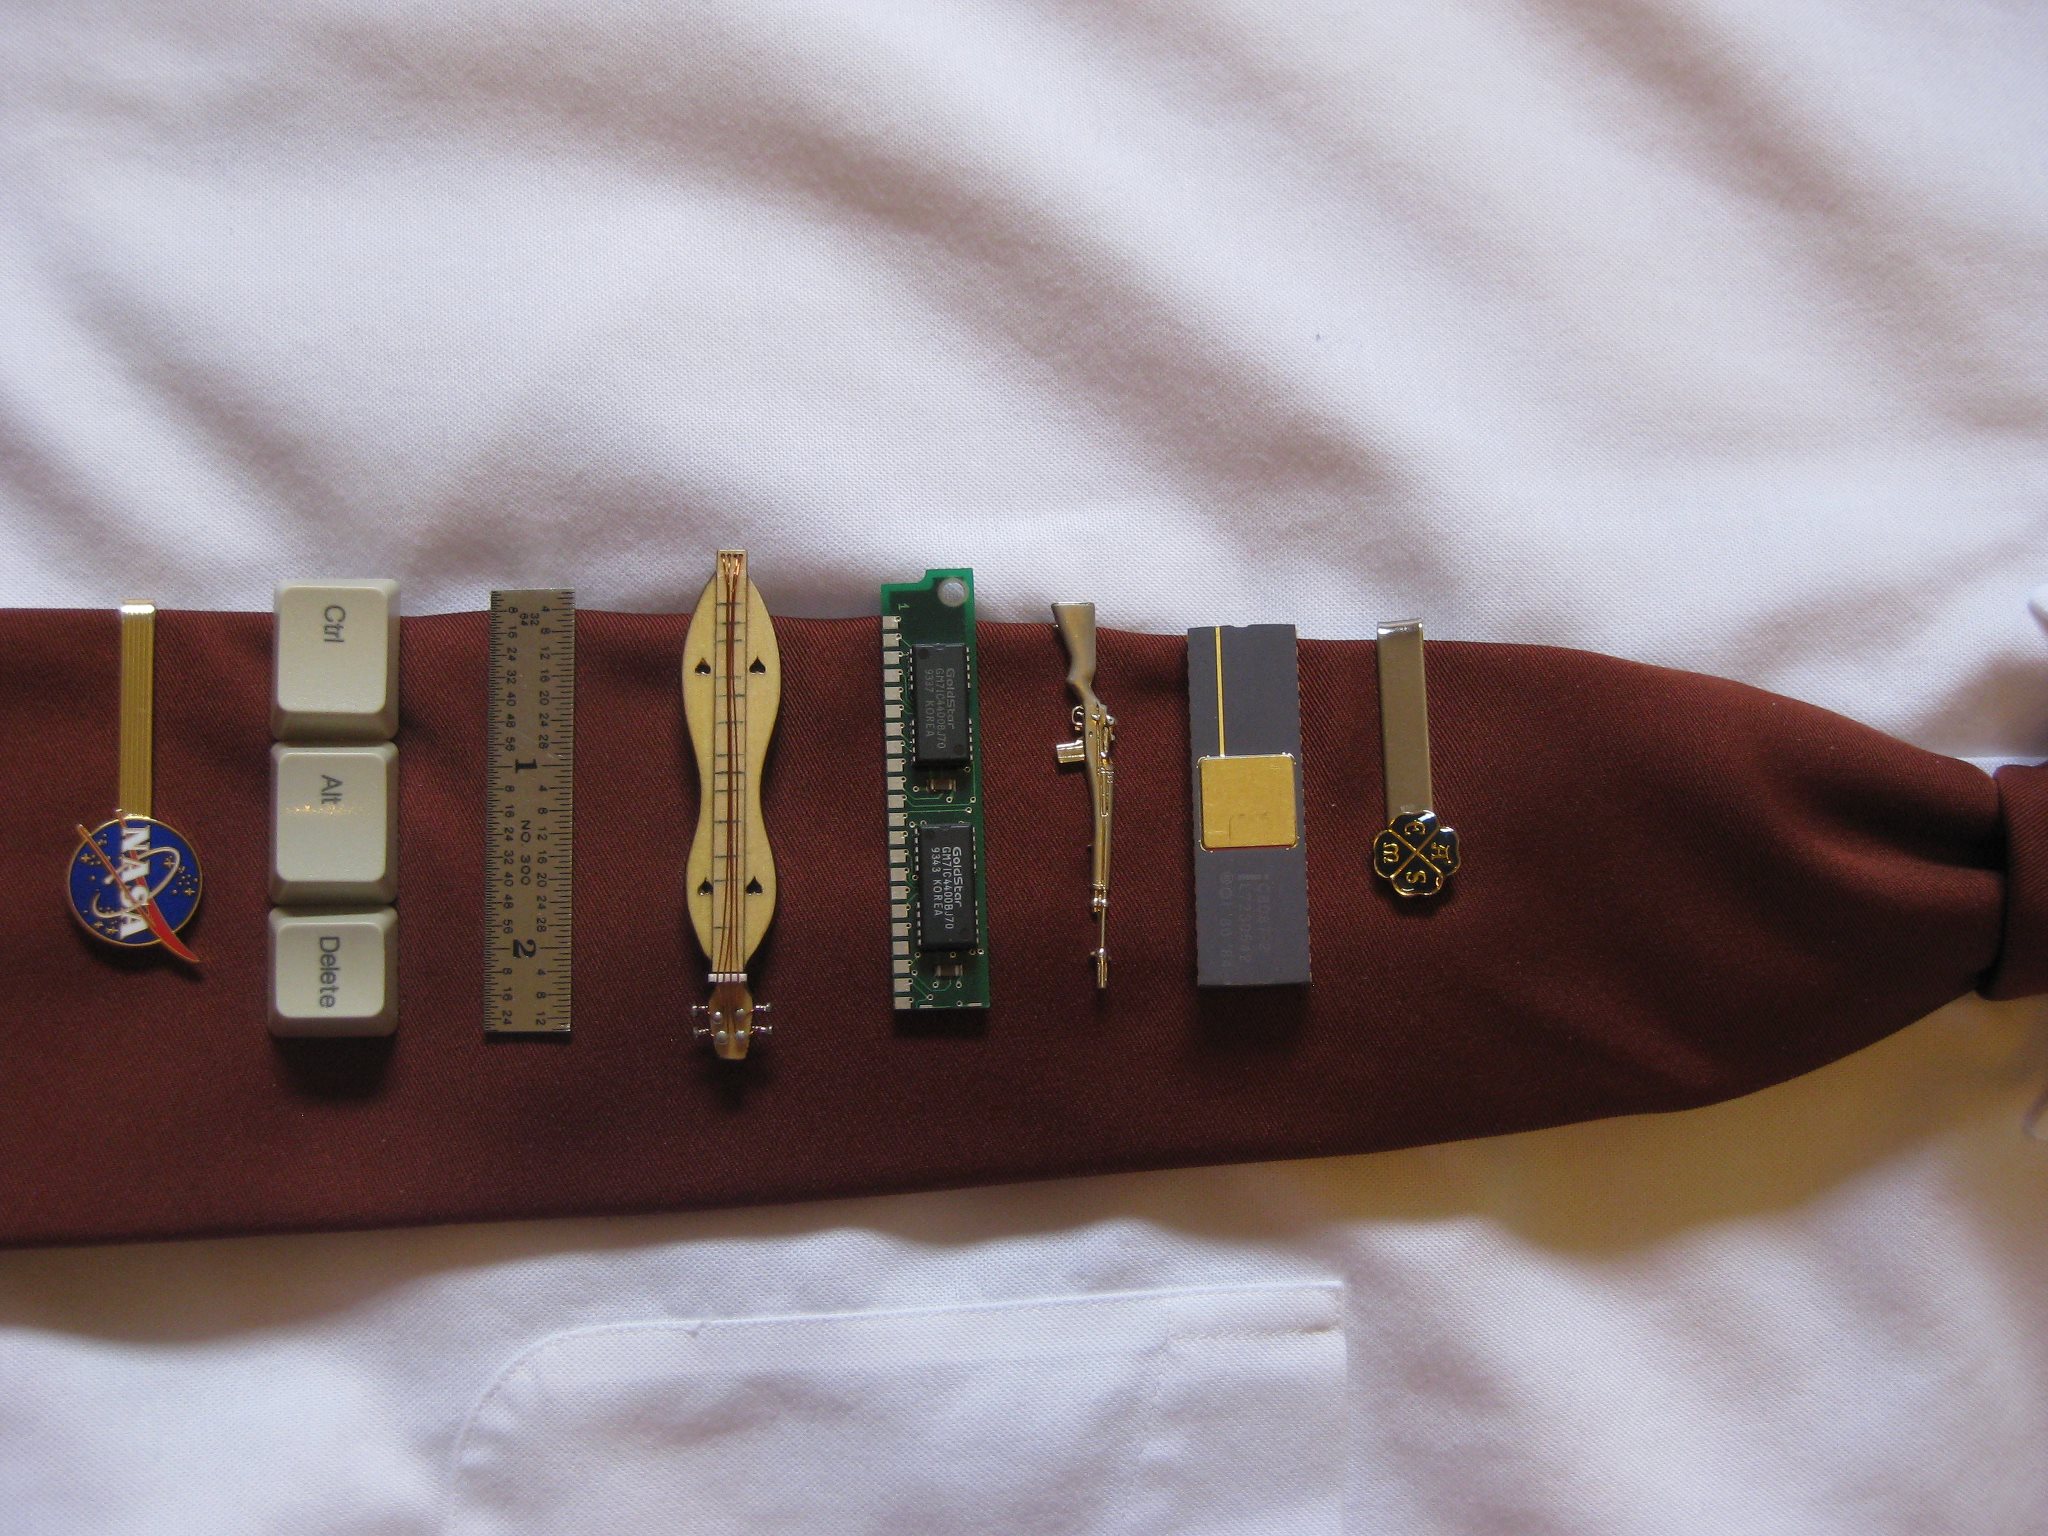 A collection of tie clips worn by Kevin Cole, professor of mechanical and materials engineering.